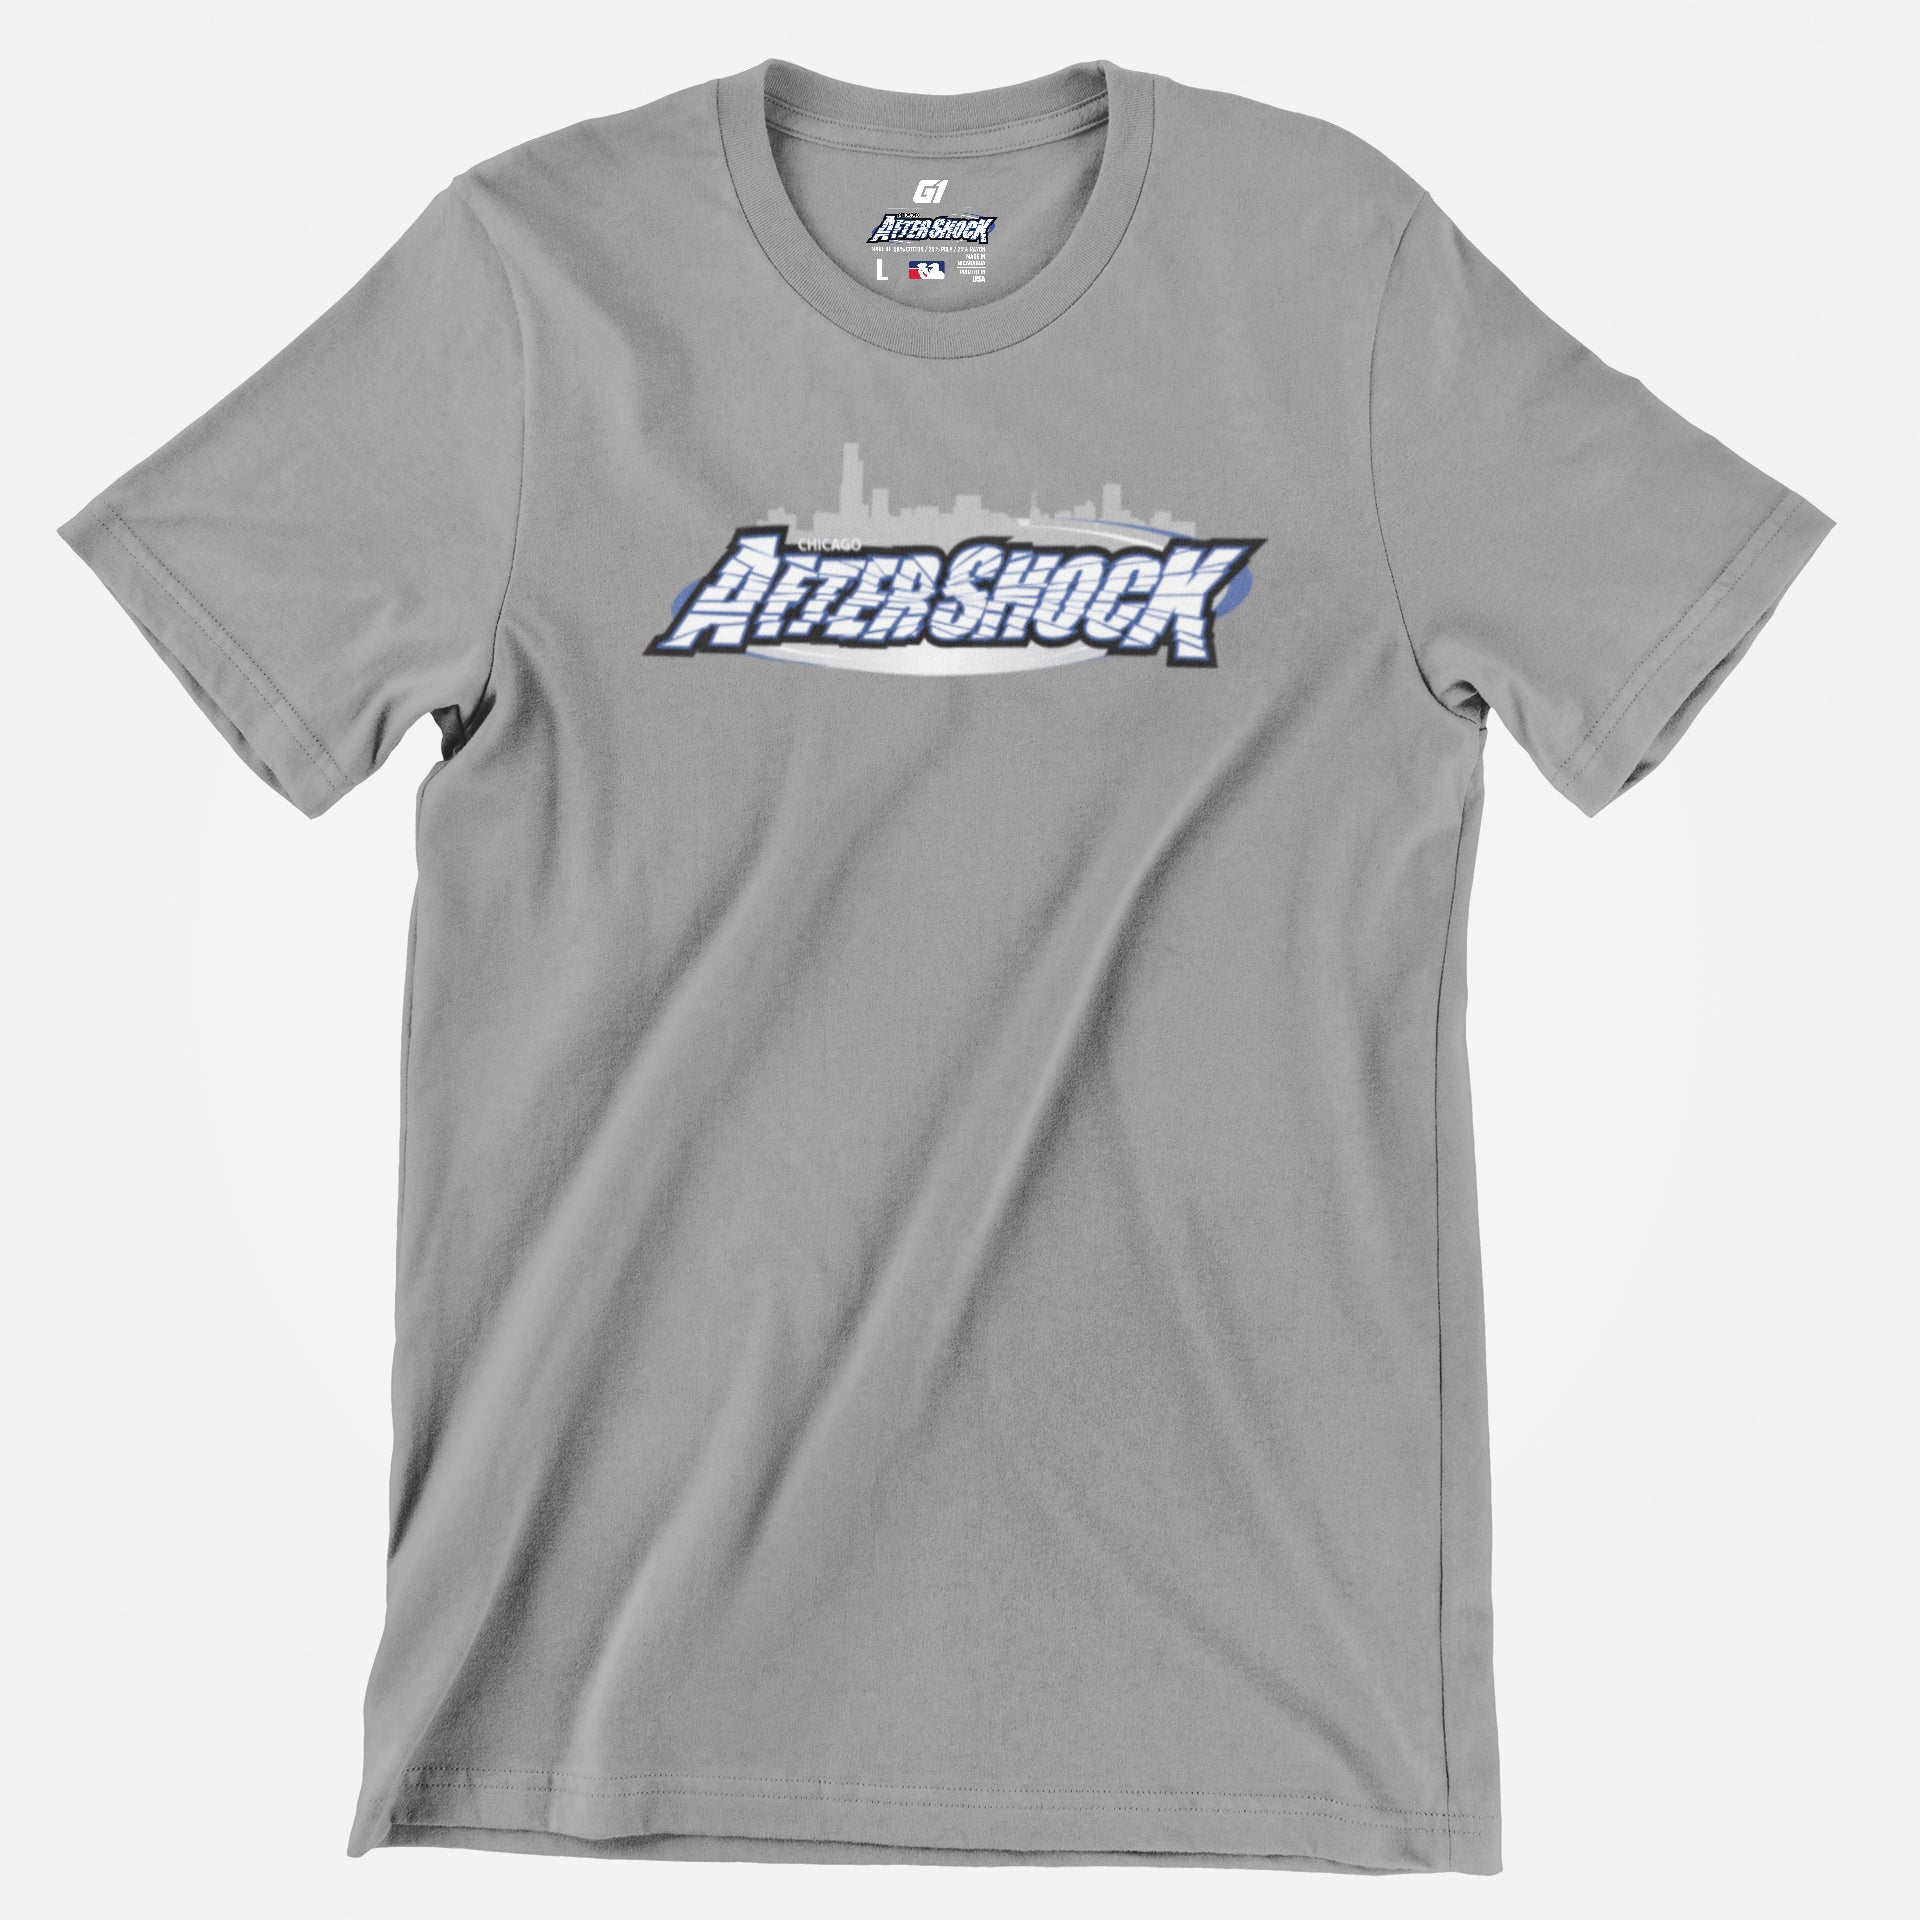 Aftershock - Ultra-soft Tee by G1